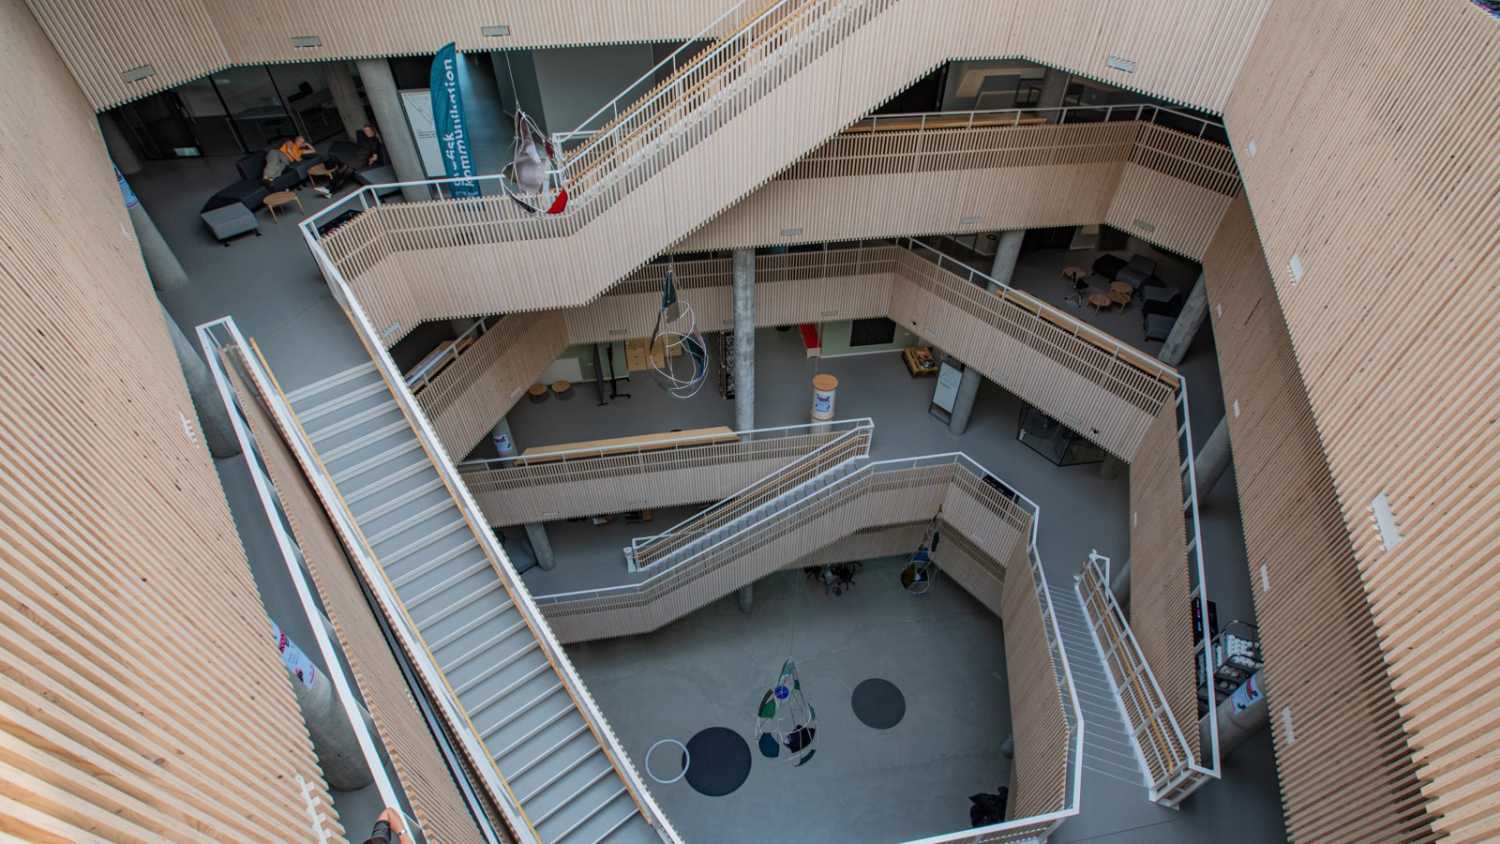 The atrium system hosts a five-minute sound installation that runs twice daily